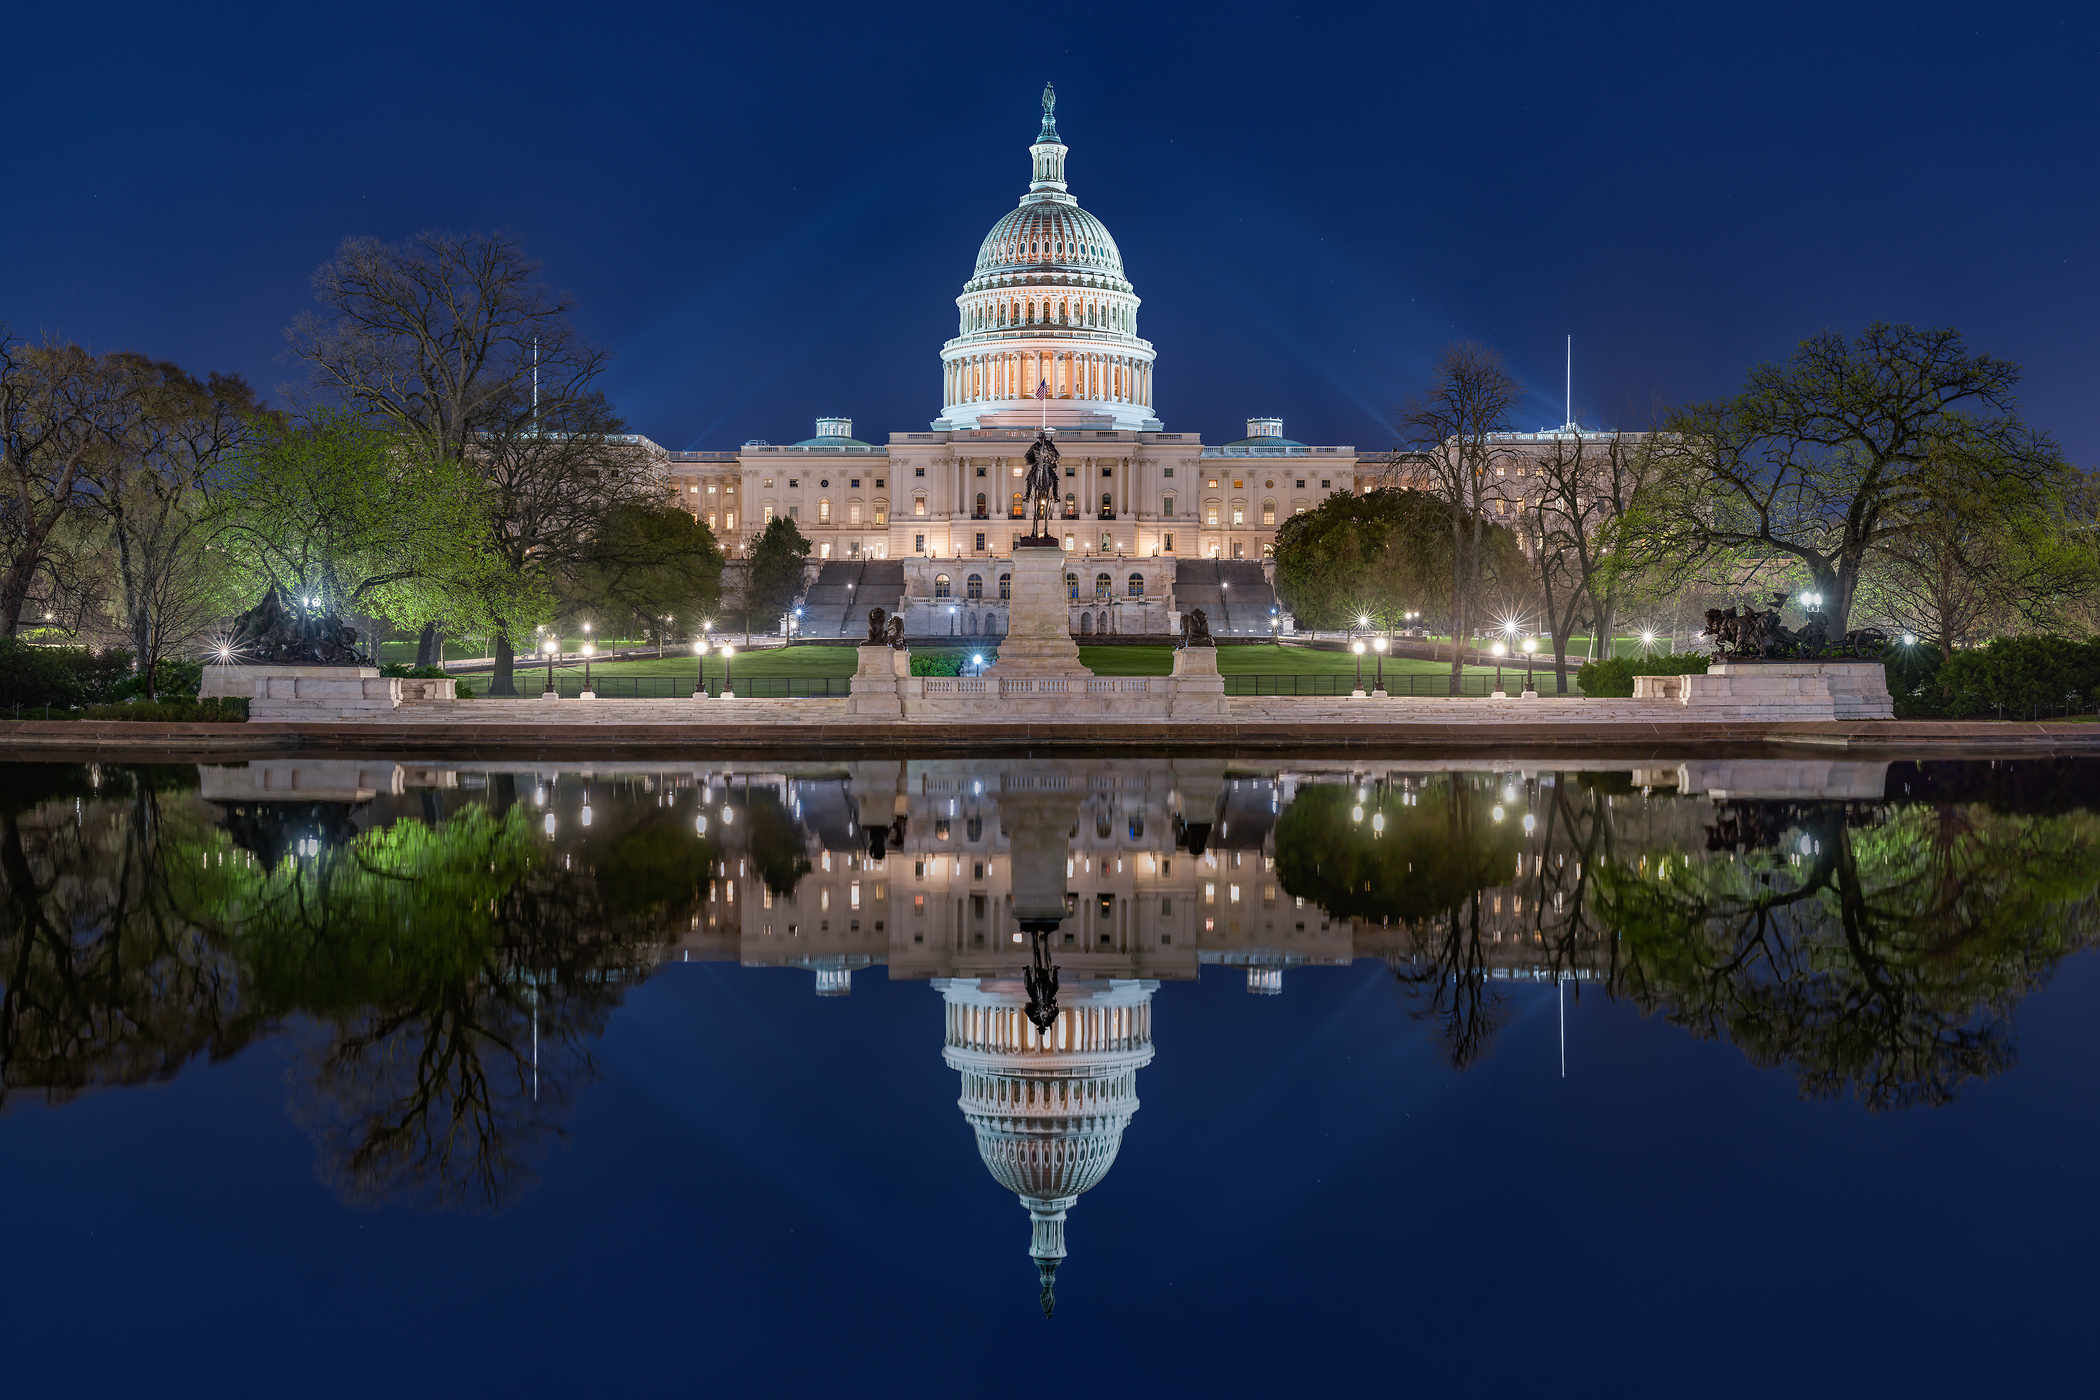 816 megapixels! A very high resolution, large-format fine art photograph of the US Capitol Building; photograph created by Tim Lo Monaco on the United States Capitol Grounds, Washington, D.C.